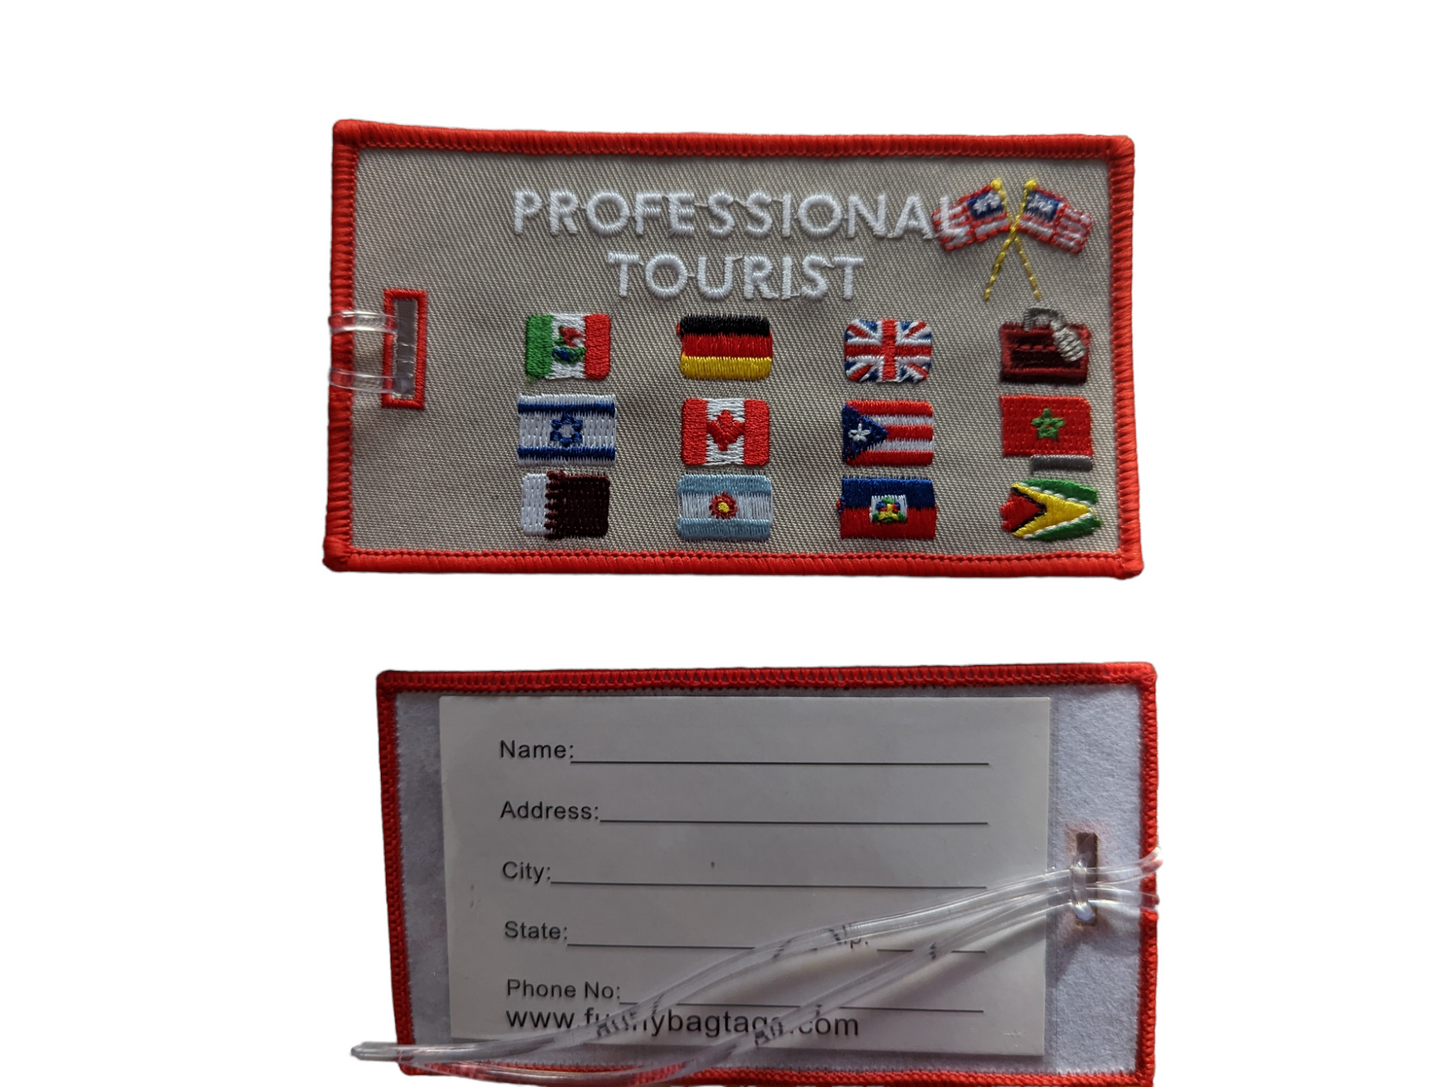 PROFESSIONAL TOURIST Luggage Tags. Black background